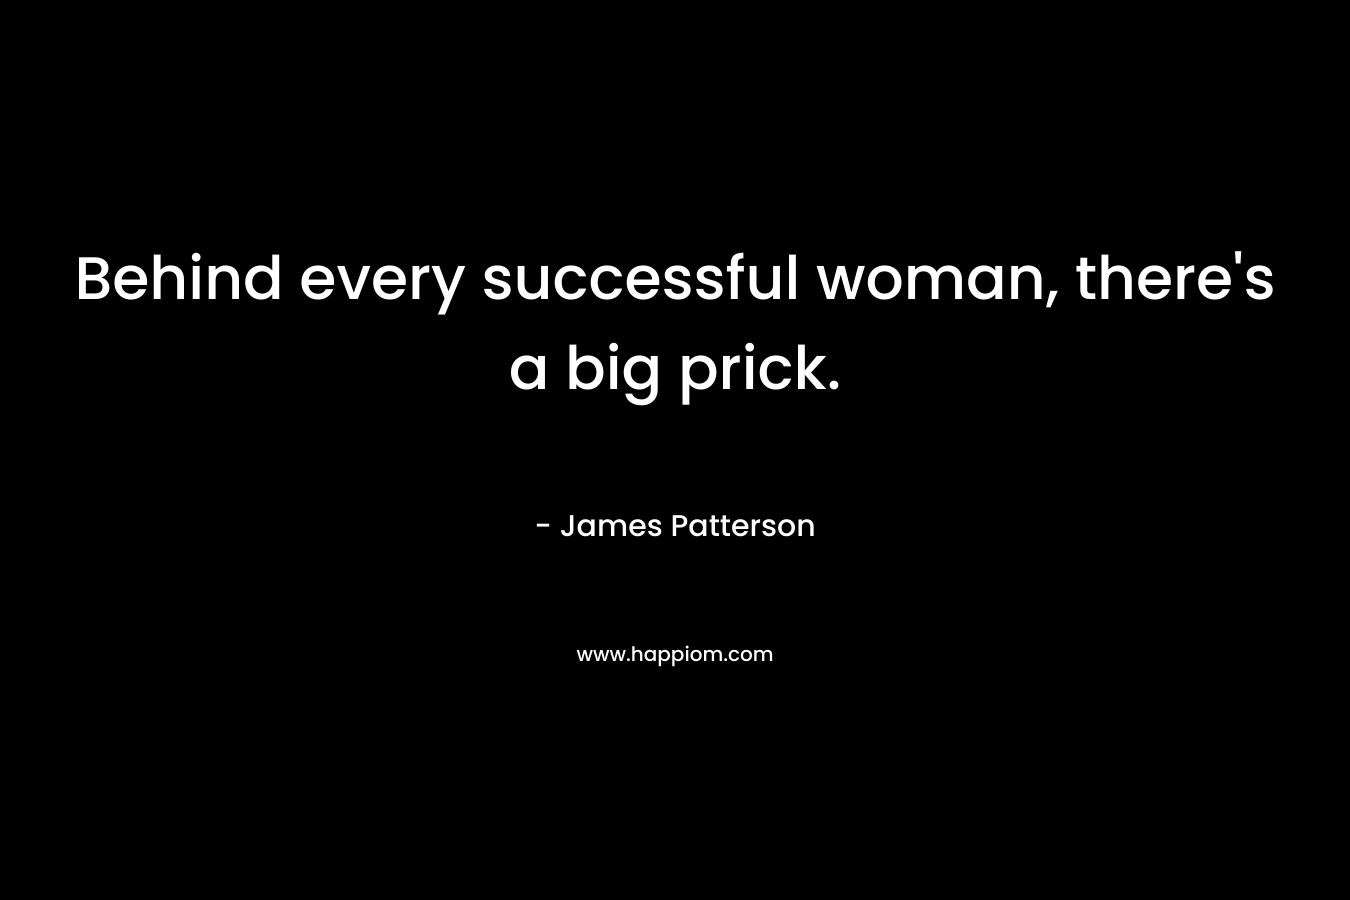 Behind every successful woman, there's a big prick.